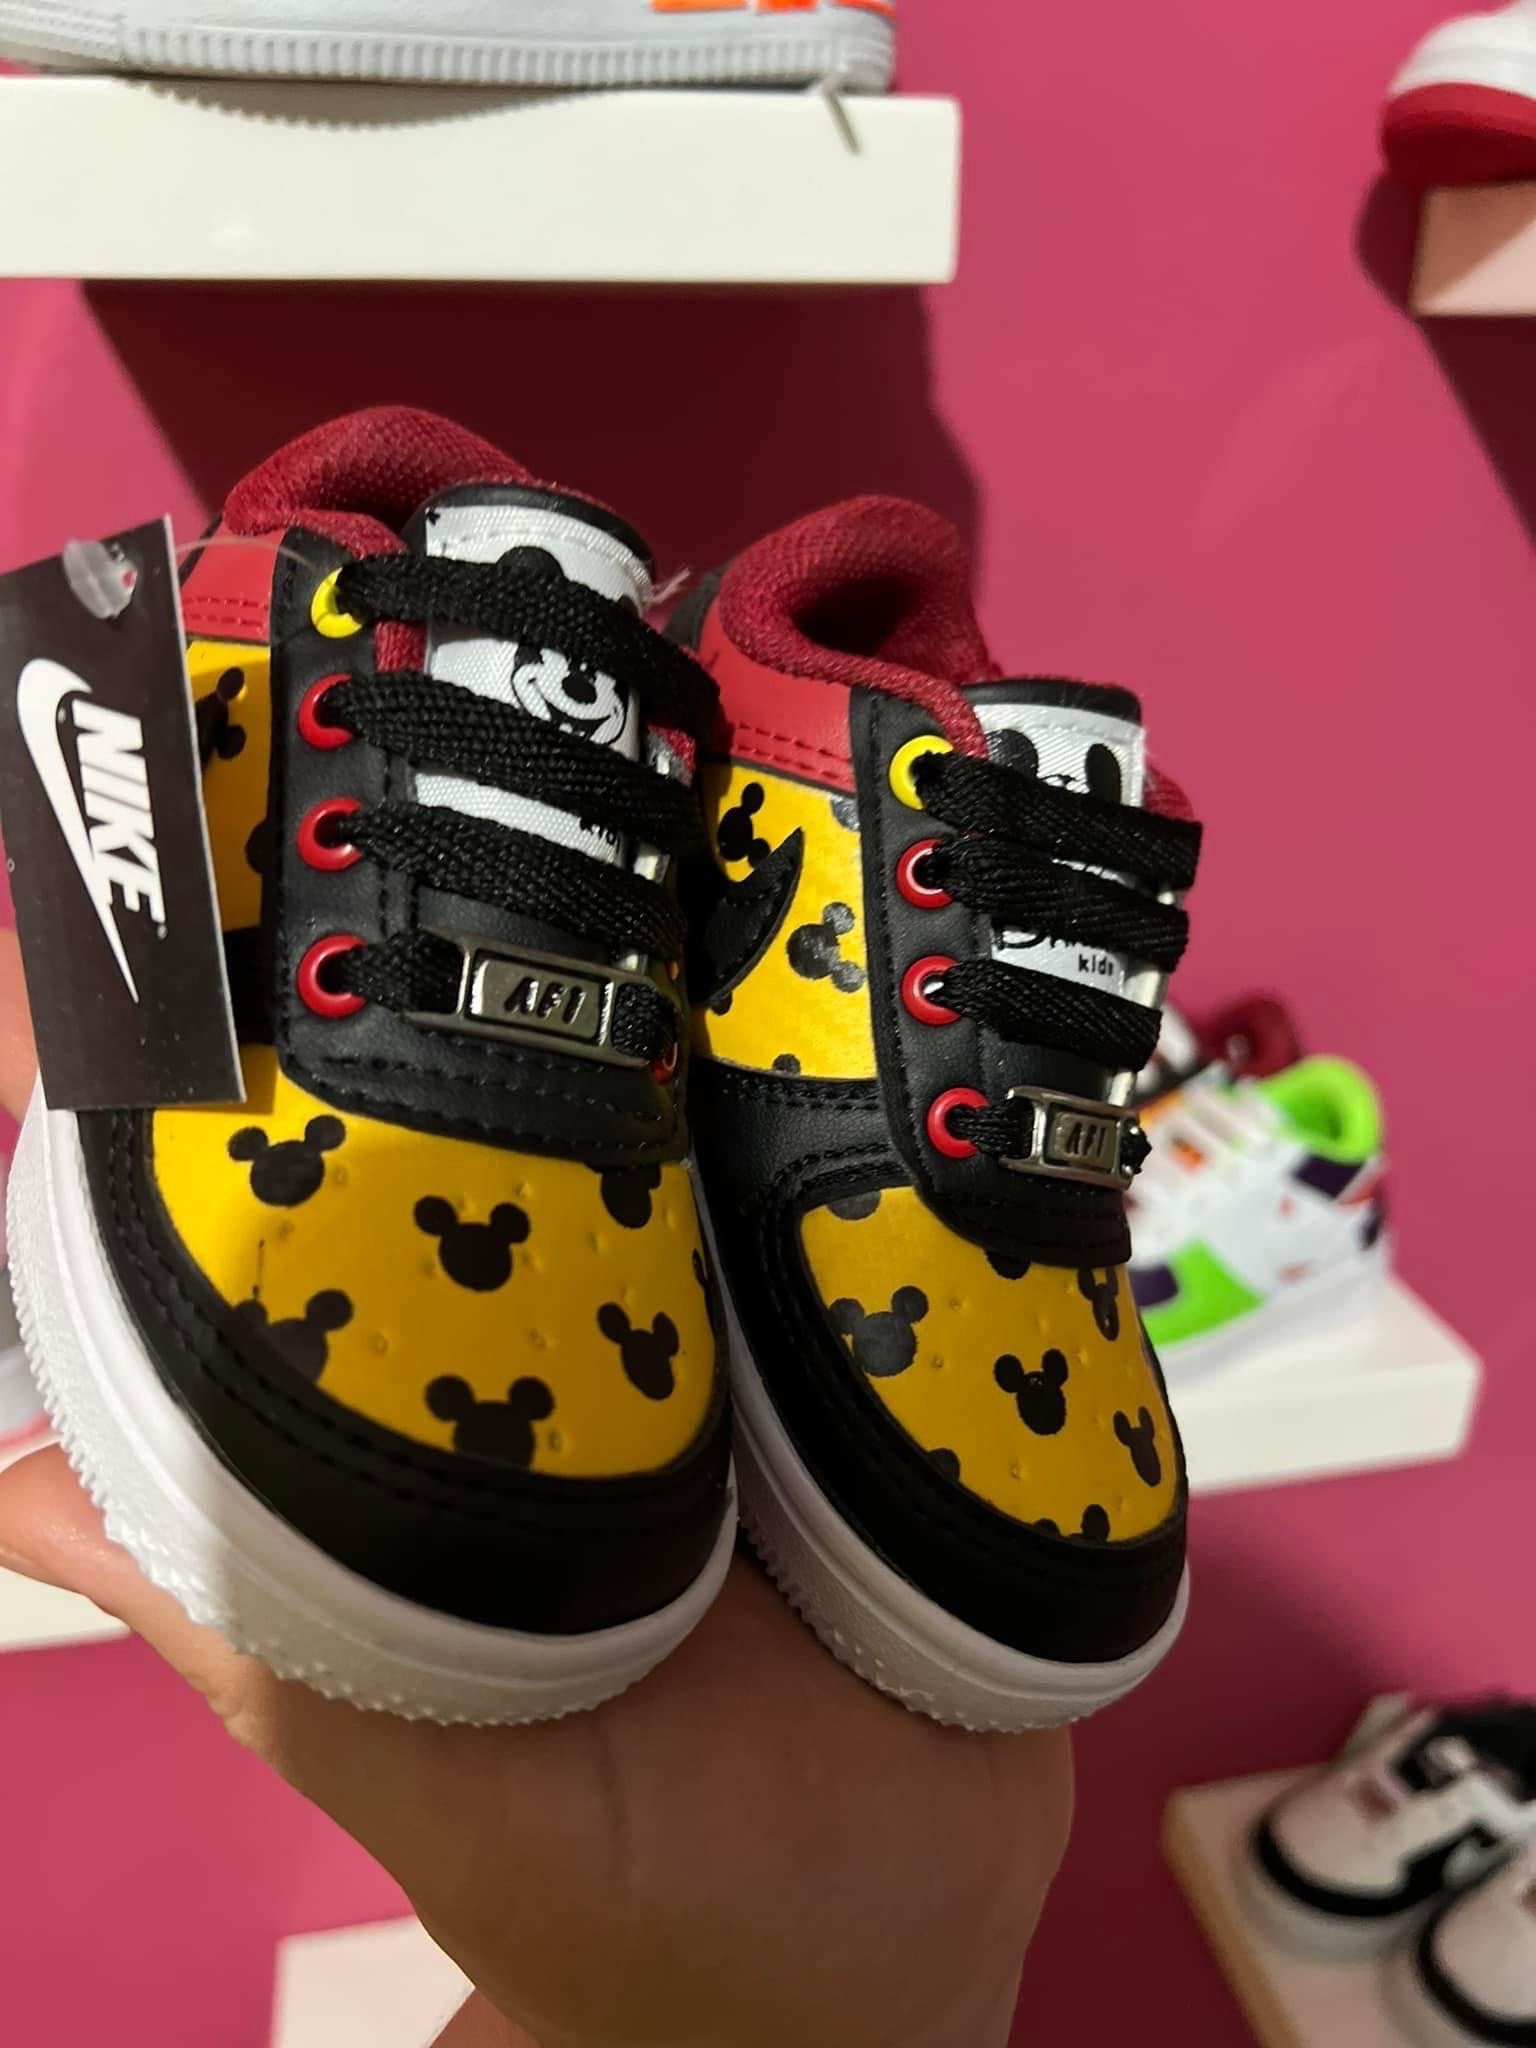 Mickey mouse shoes - Etsy.de